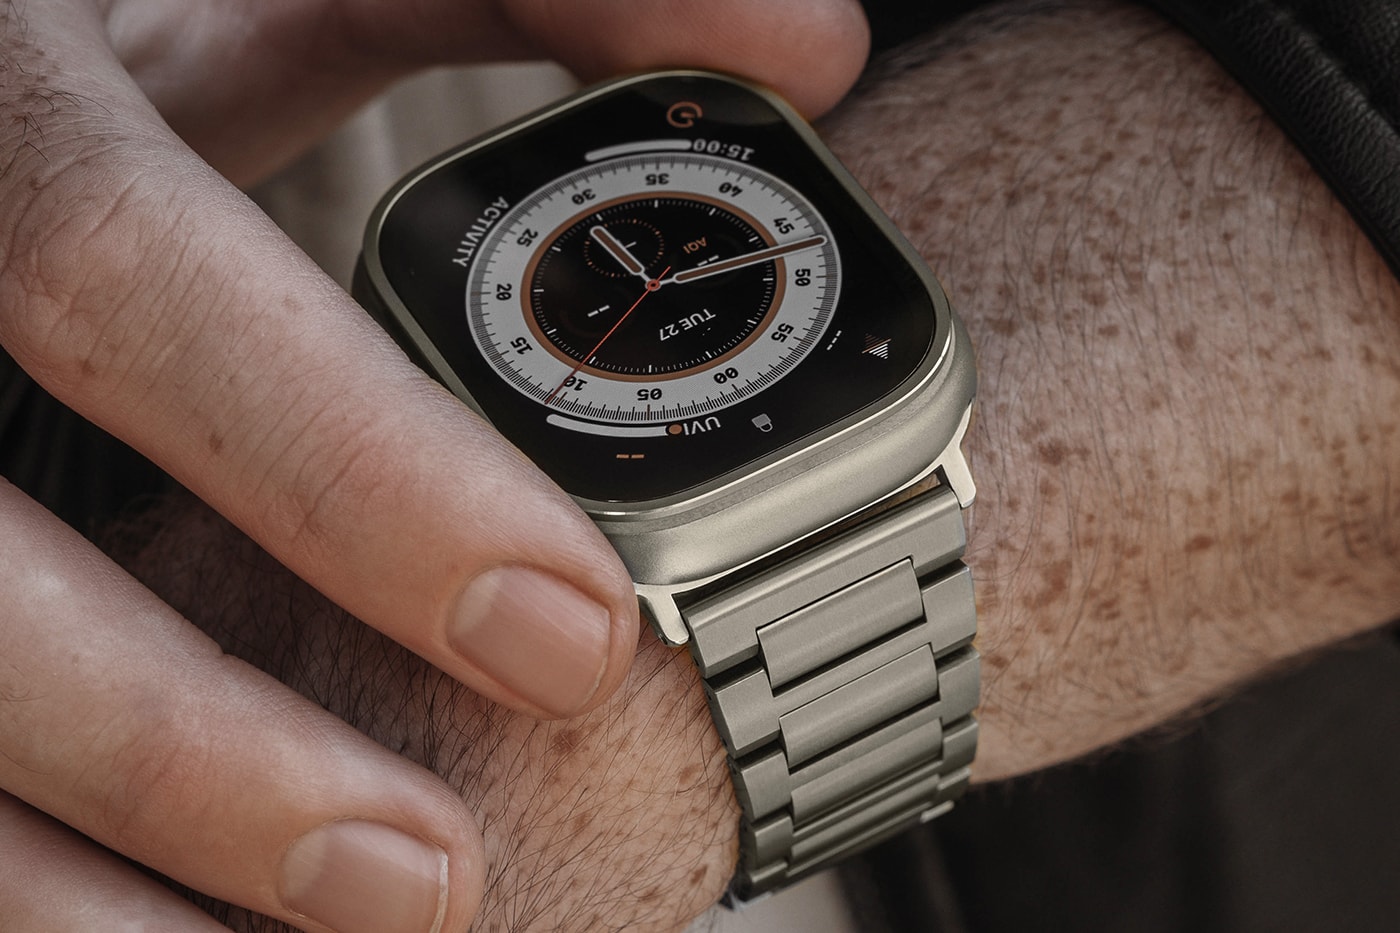 Luxury Apple Watch Bands to Upgrade Your Gadgetry Game